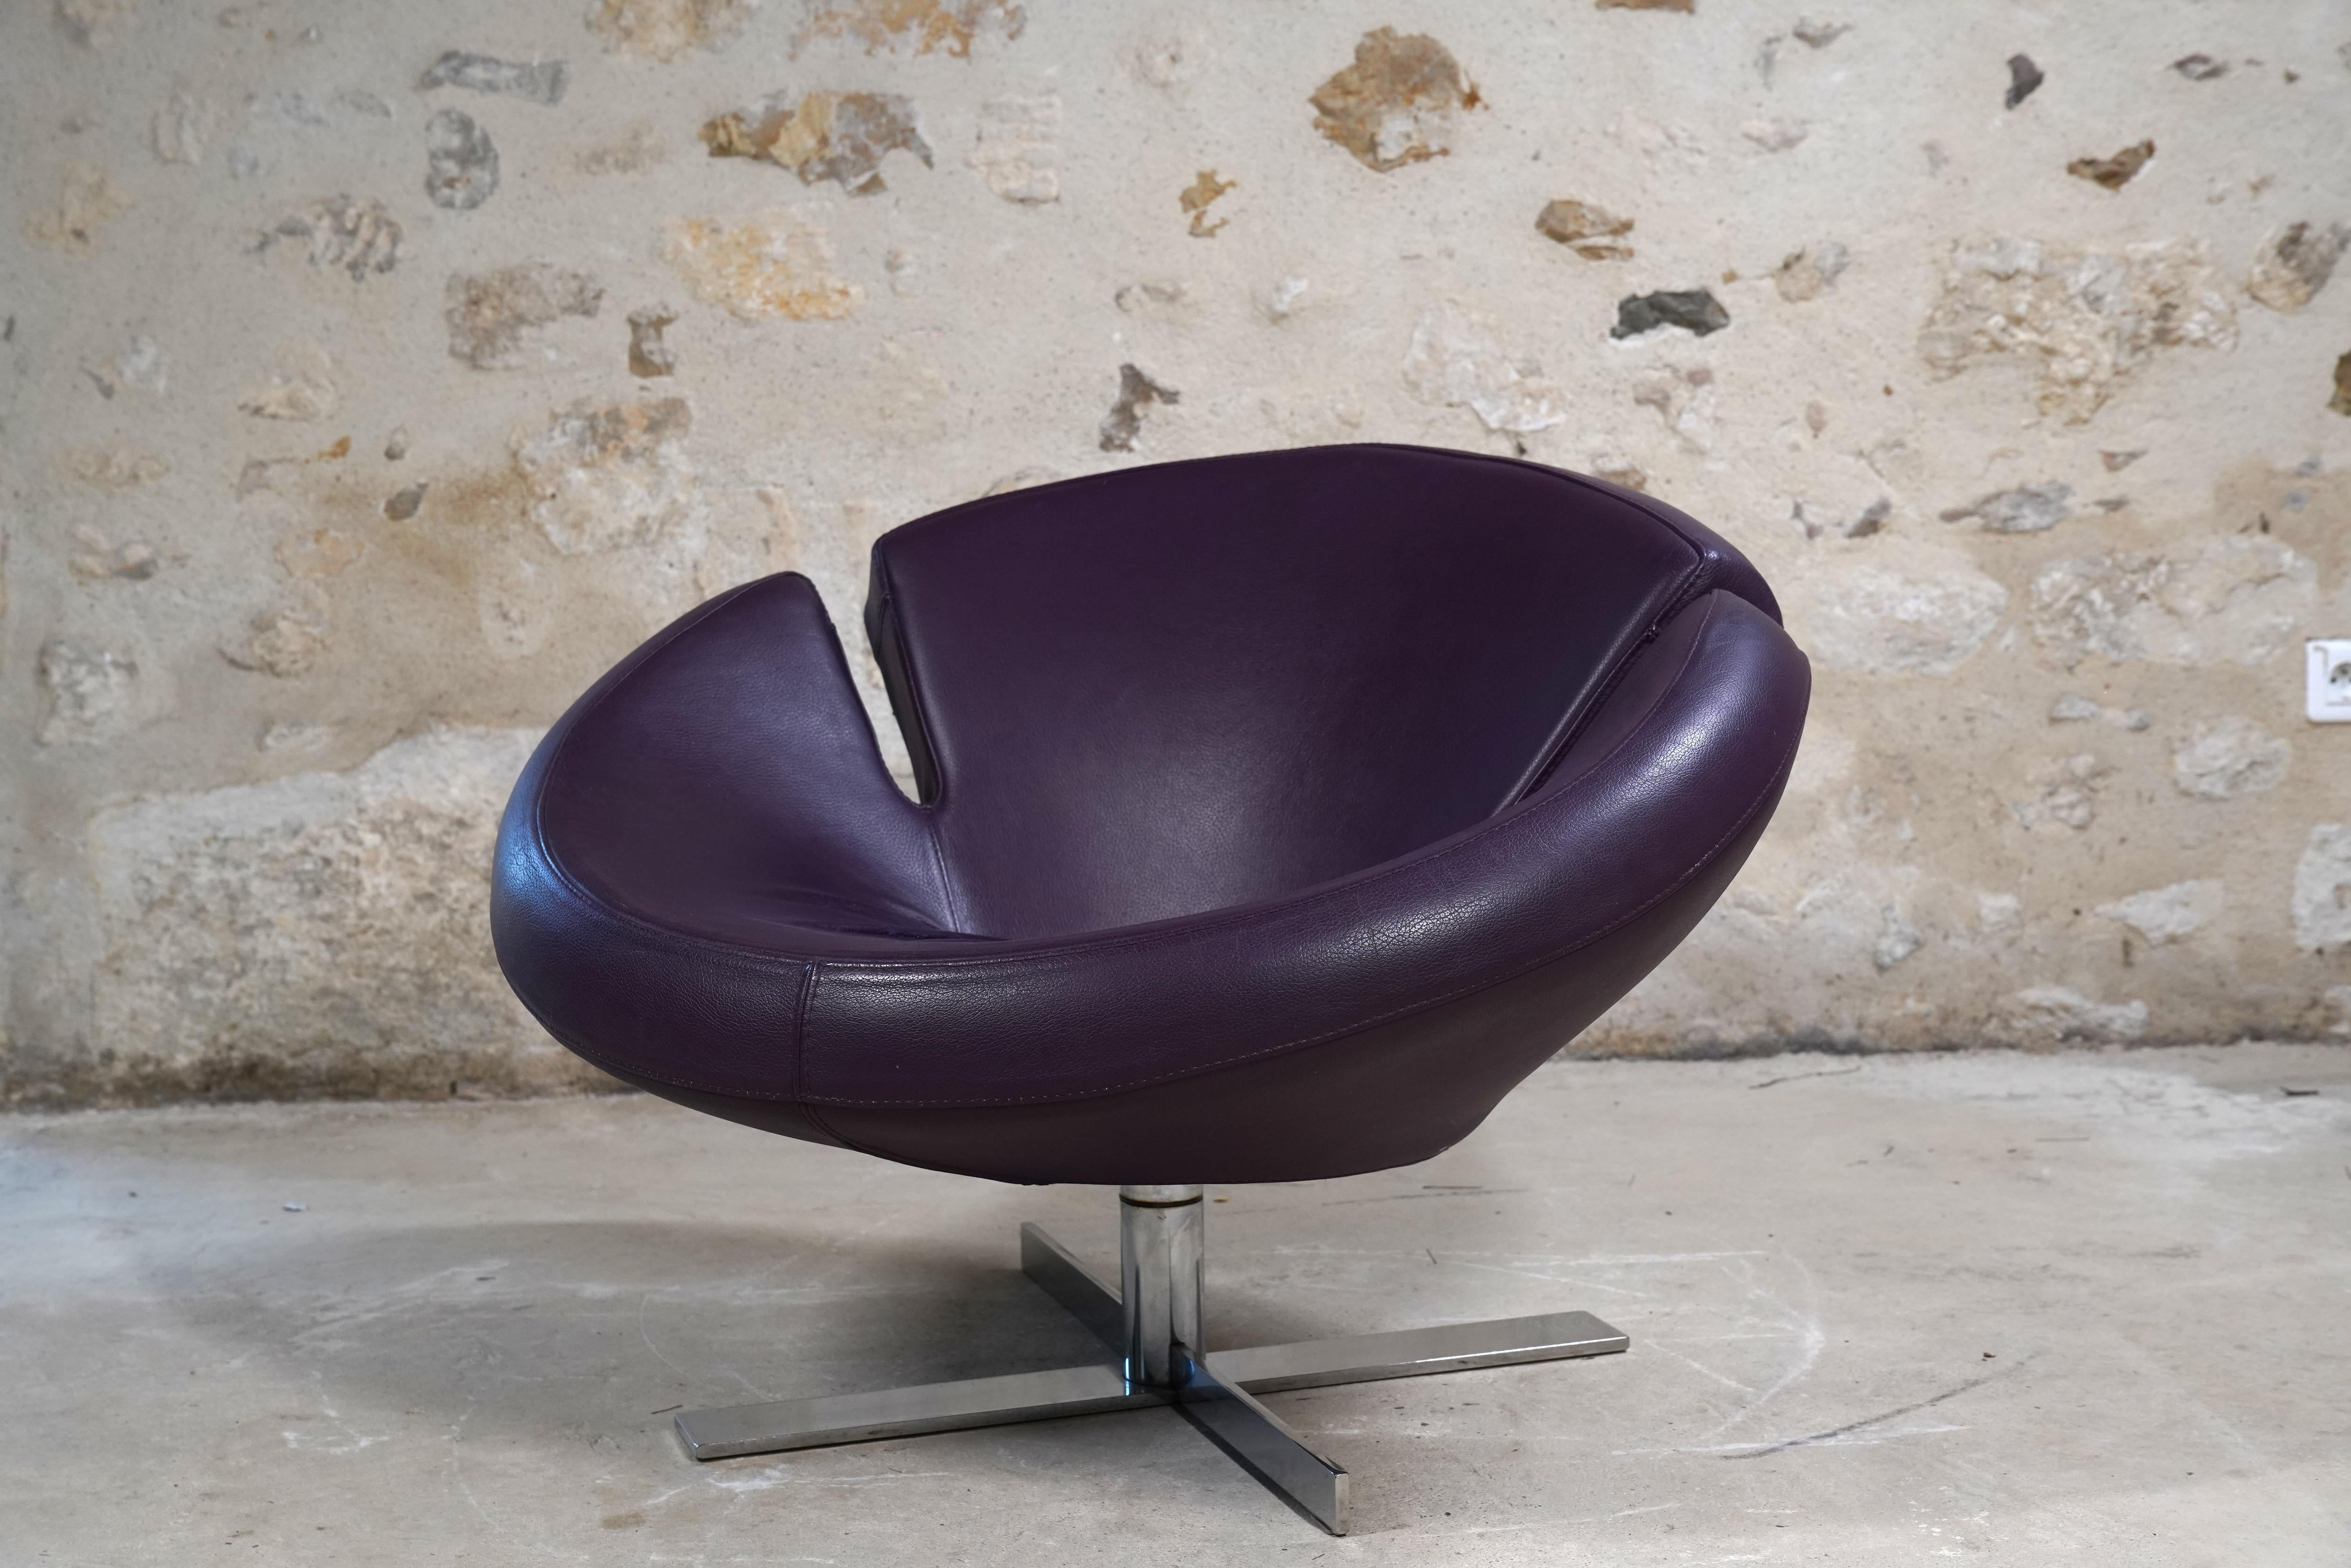 Gorgeous and very seldom seen Roche Bobois 'Signet' chair by Robert Tapanassi & Maurizio Manzoni. I'm unable to find another available for sale online and struggling to find further information regarding provenance other than a Roche Bobois